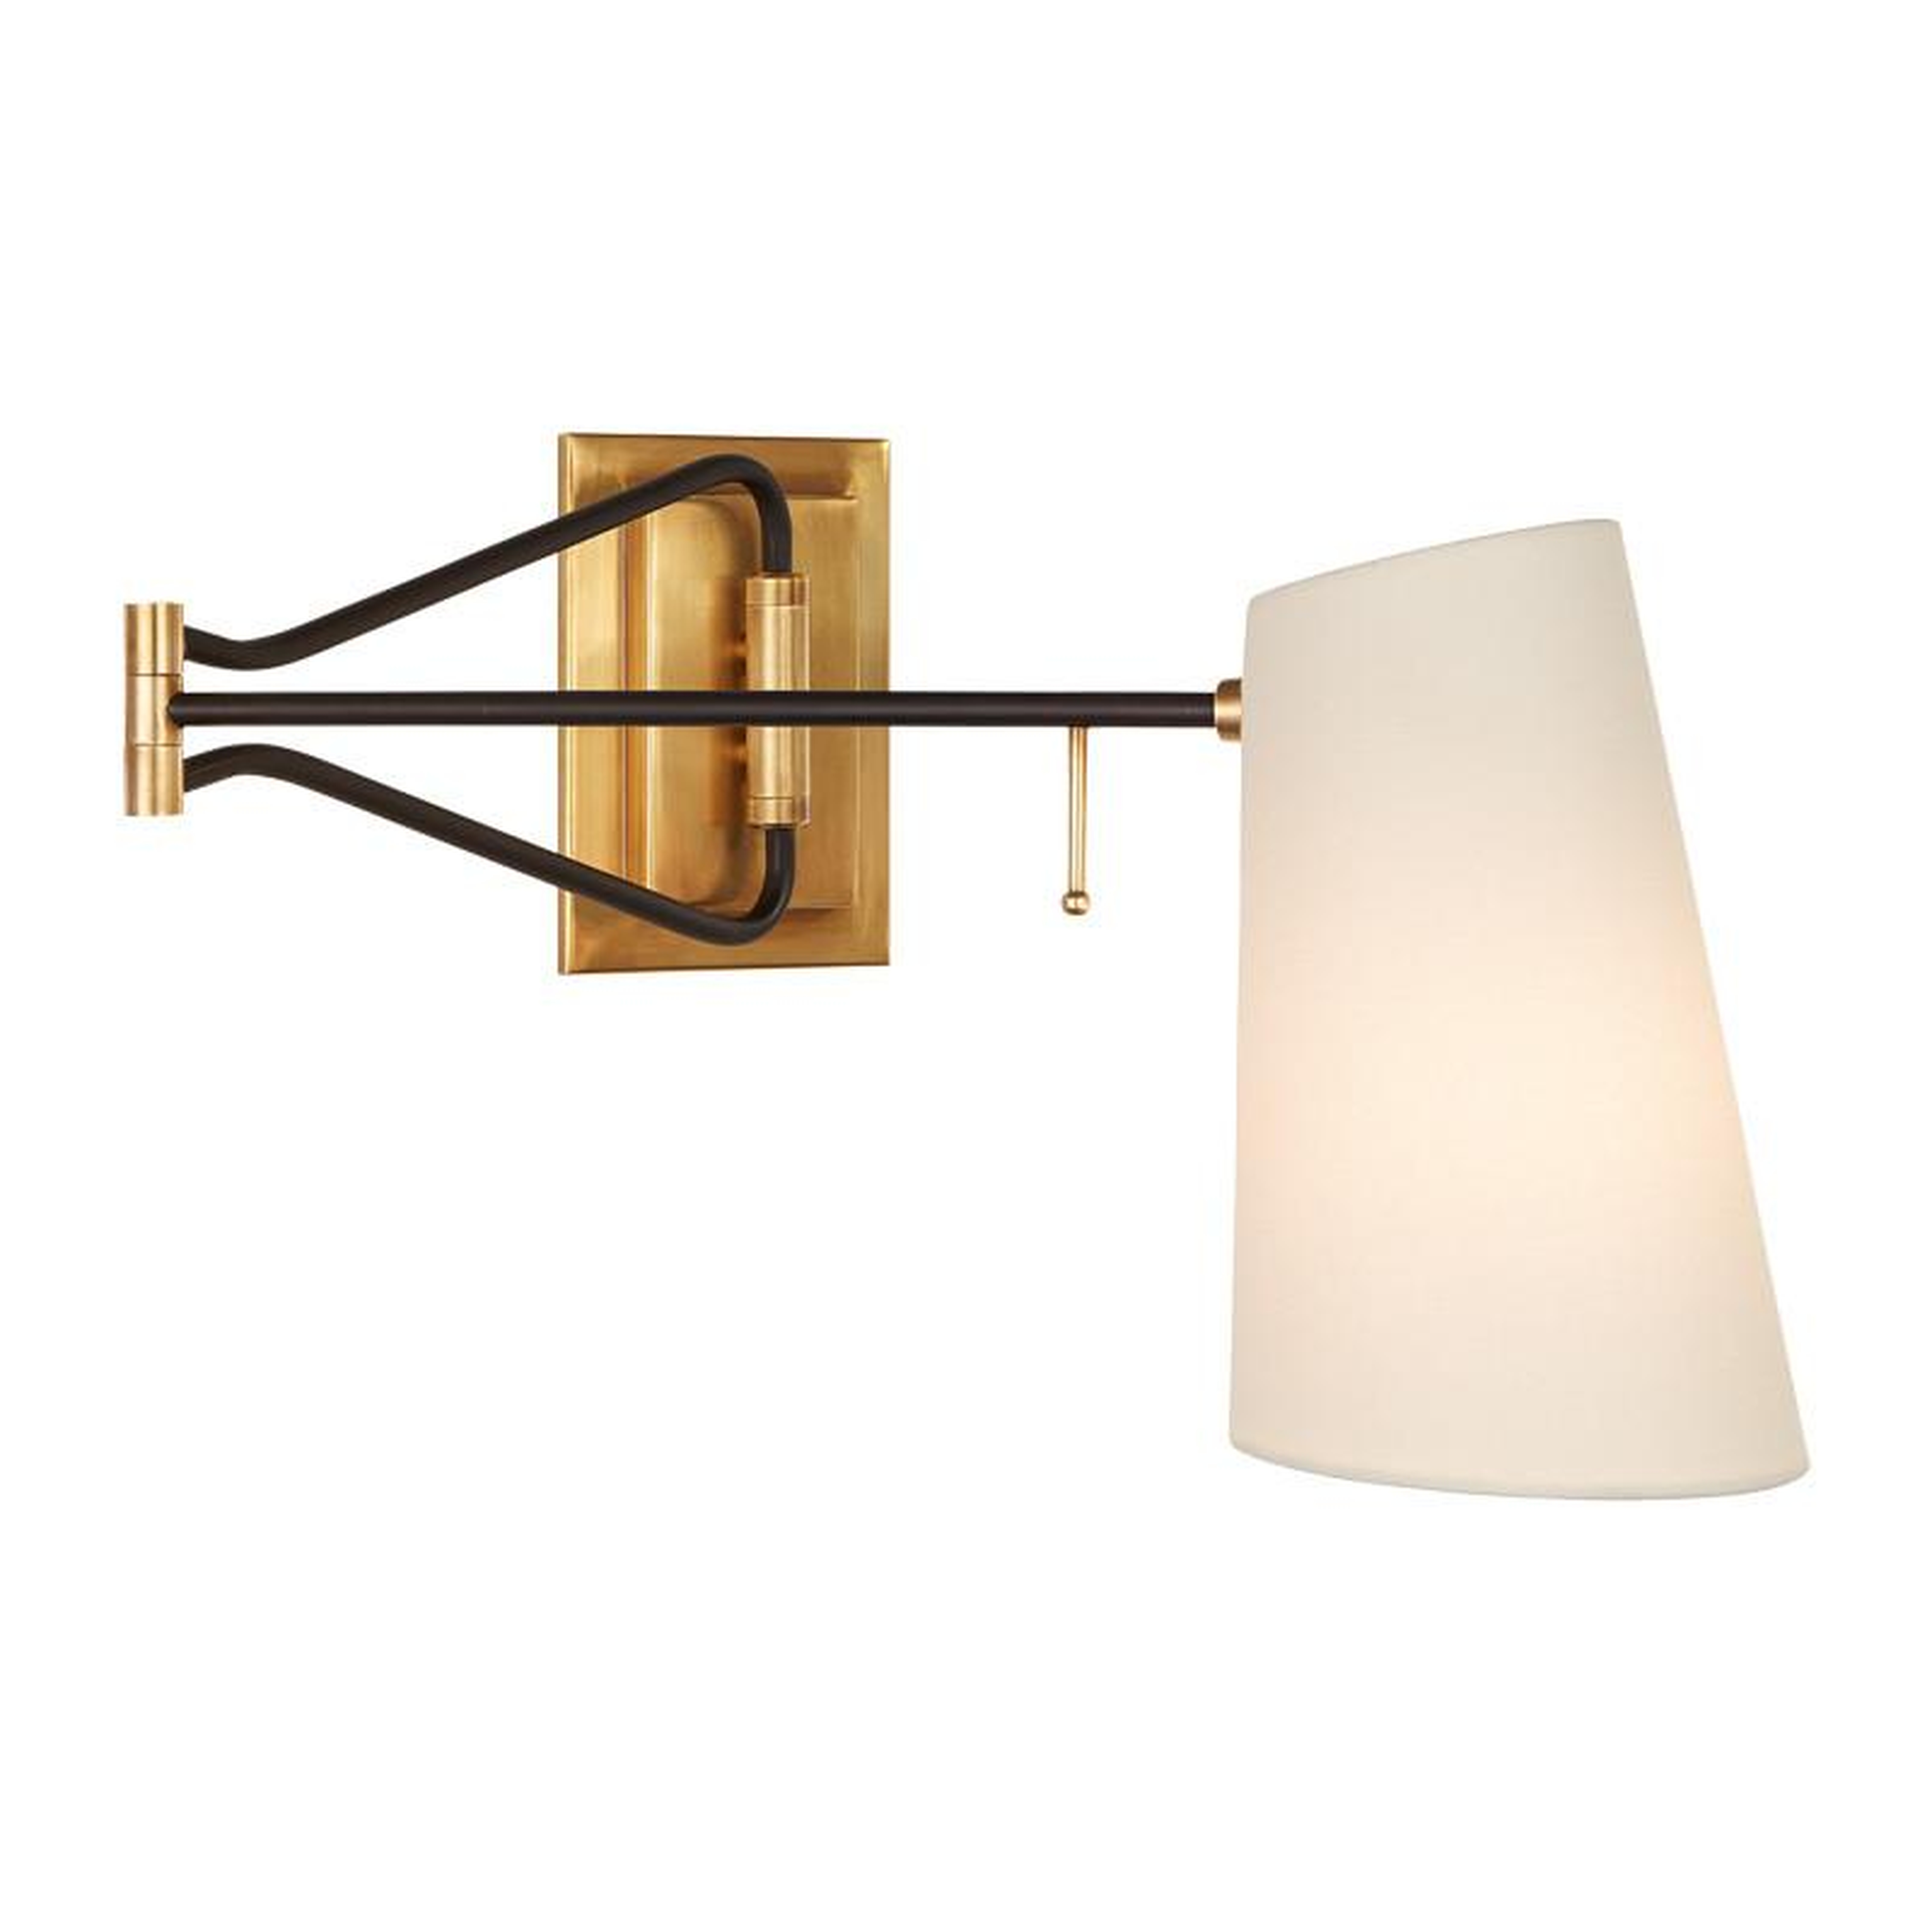 KEIL SWING ARM WALL LIGHT - HAND-RUBBED ANTIQUE BRASS & BLACK - McGee & Co.